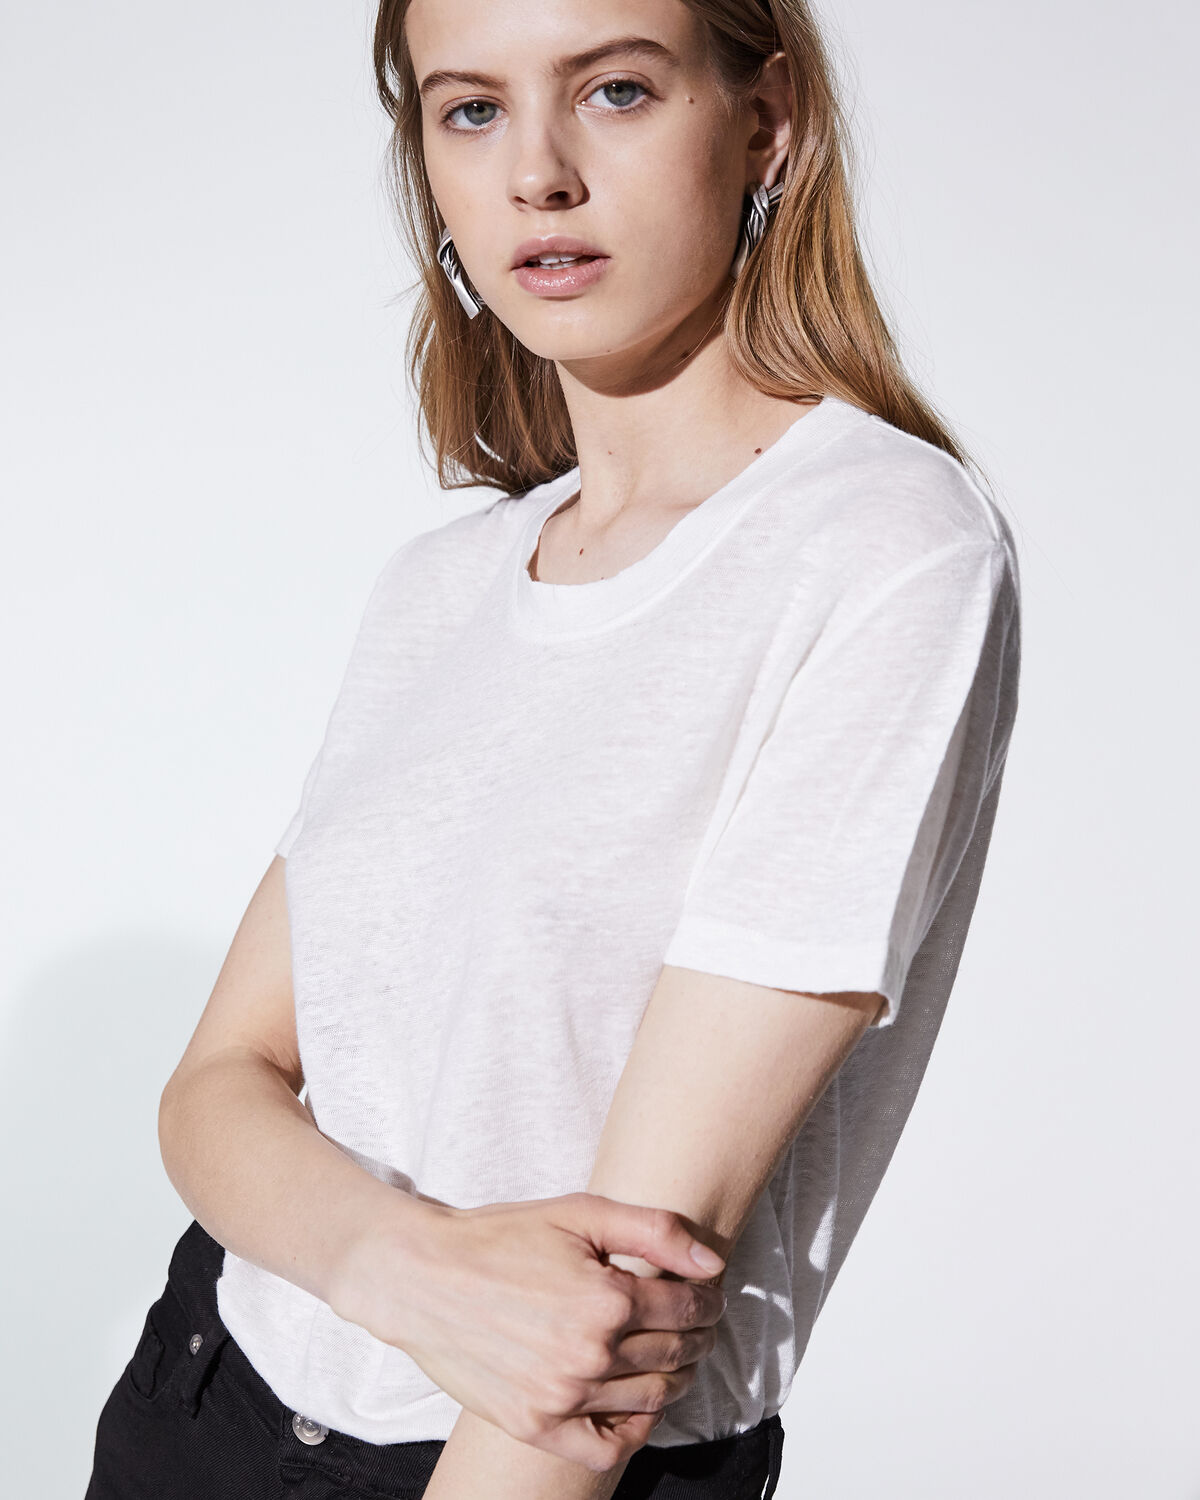 Photo of IRO Paris Luciana T-Shirt Ecru - This Slightly Transparent Linen T-shirt Is A Basic Part Of The Iro Cloakroom, Easy To Wear With The Seasons. Spring Summer 19